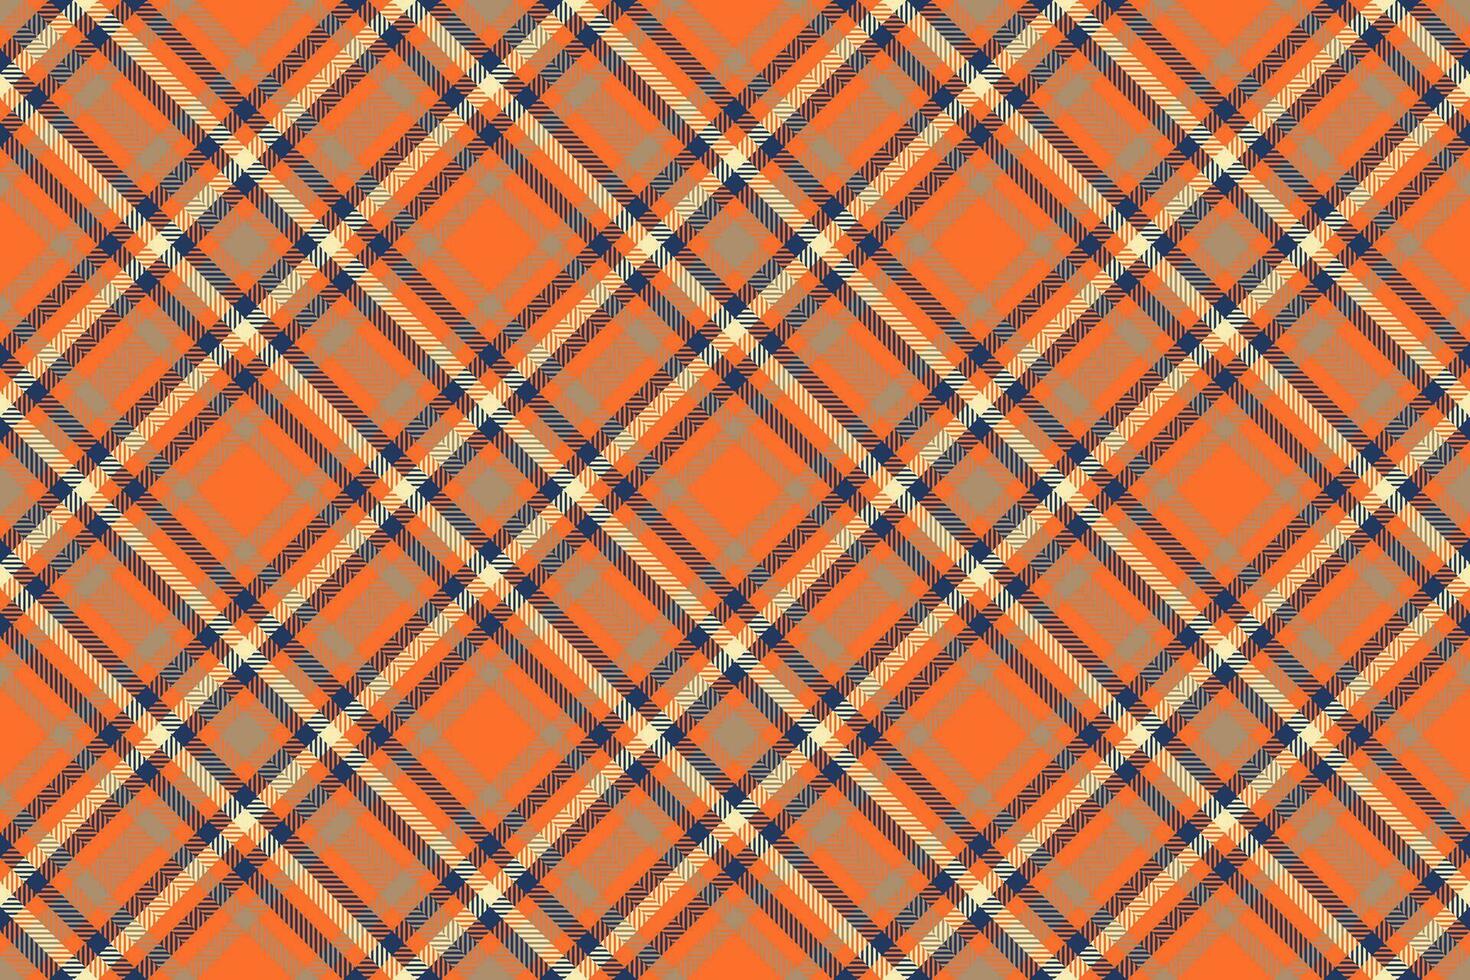 Plaid pattern tartan of background check fabric with a vector seamless textile texture.